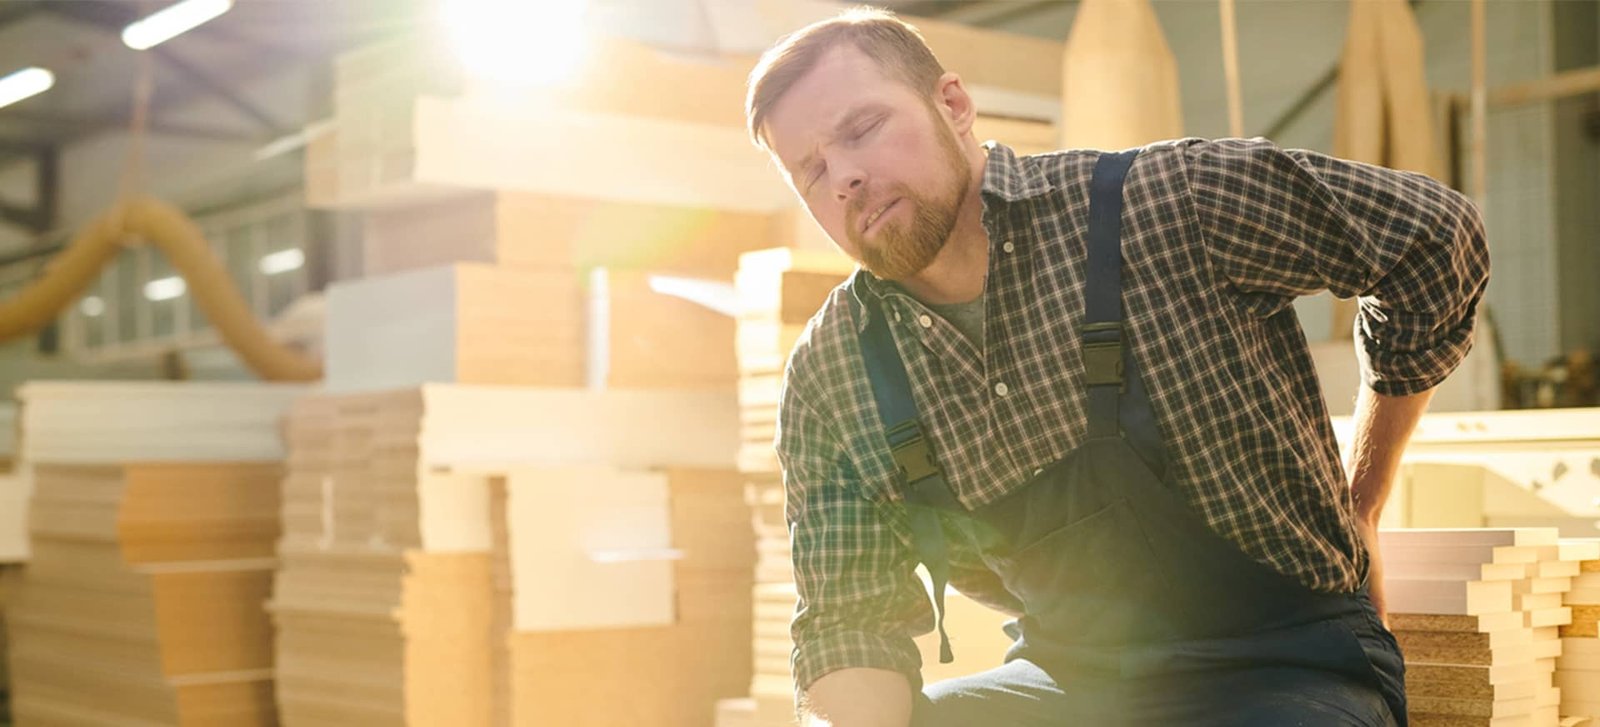 How to Prevent Most Common Back Injuries at the Workplace